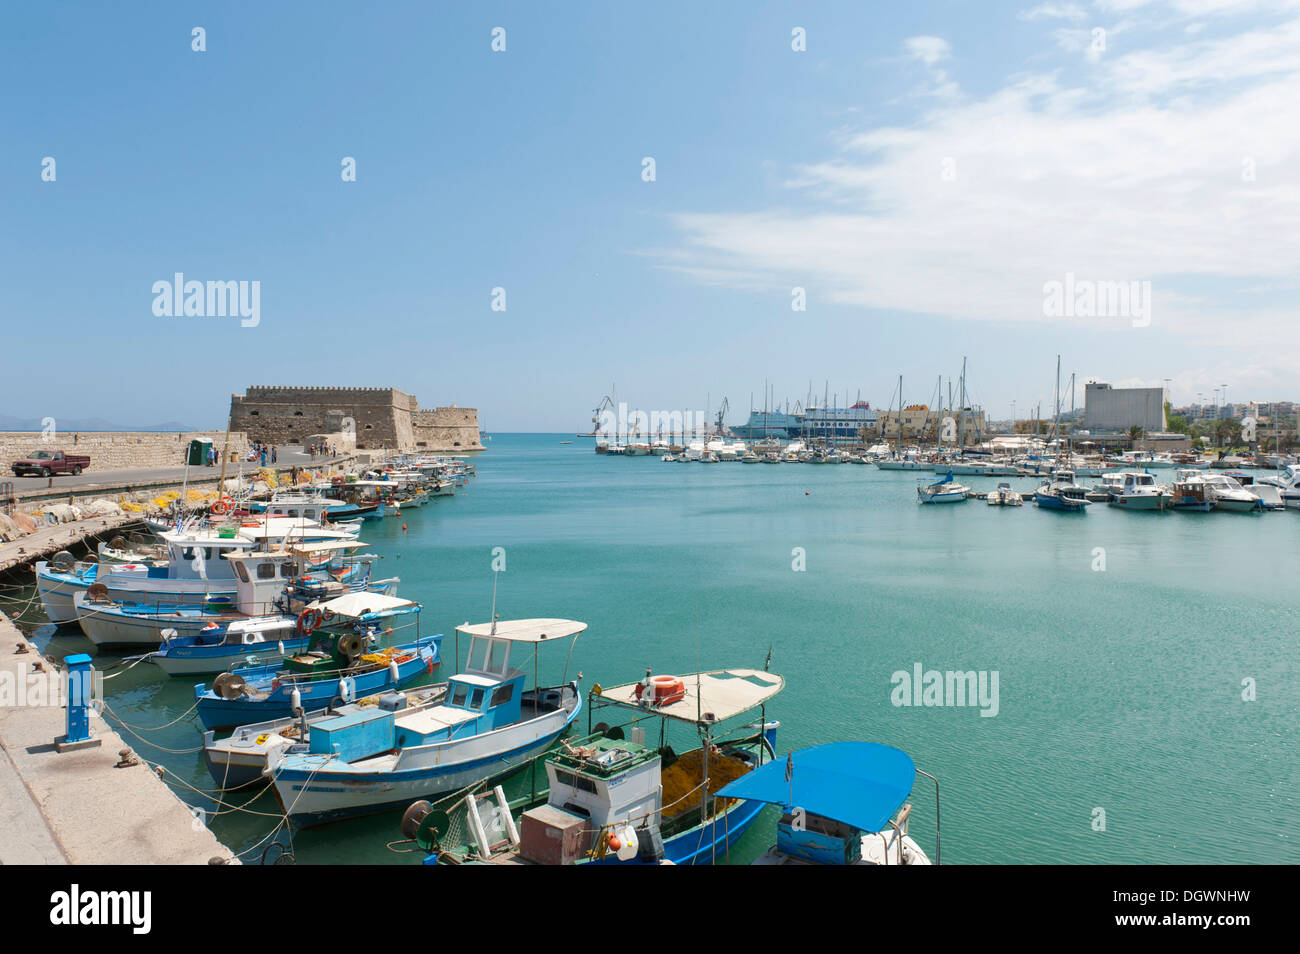 Fishing harbour, fishing boats, the old port with the Koules fortress, Rocca al Mare, Heraklion or Iraklion, Crete, Greece Stock Photo